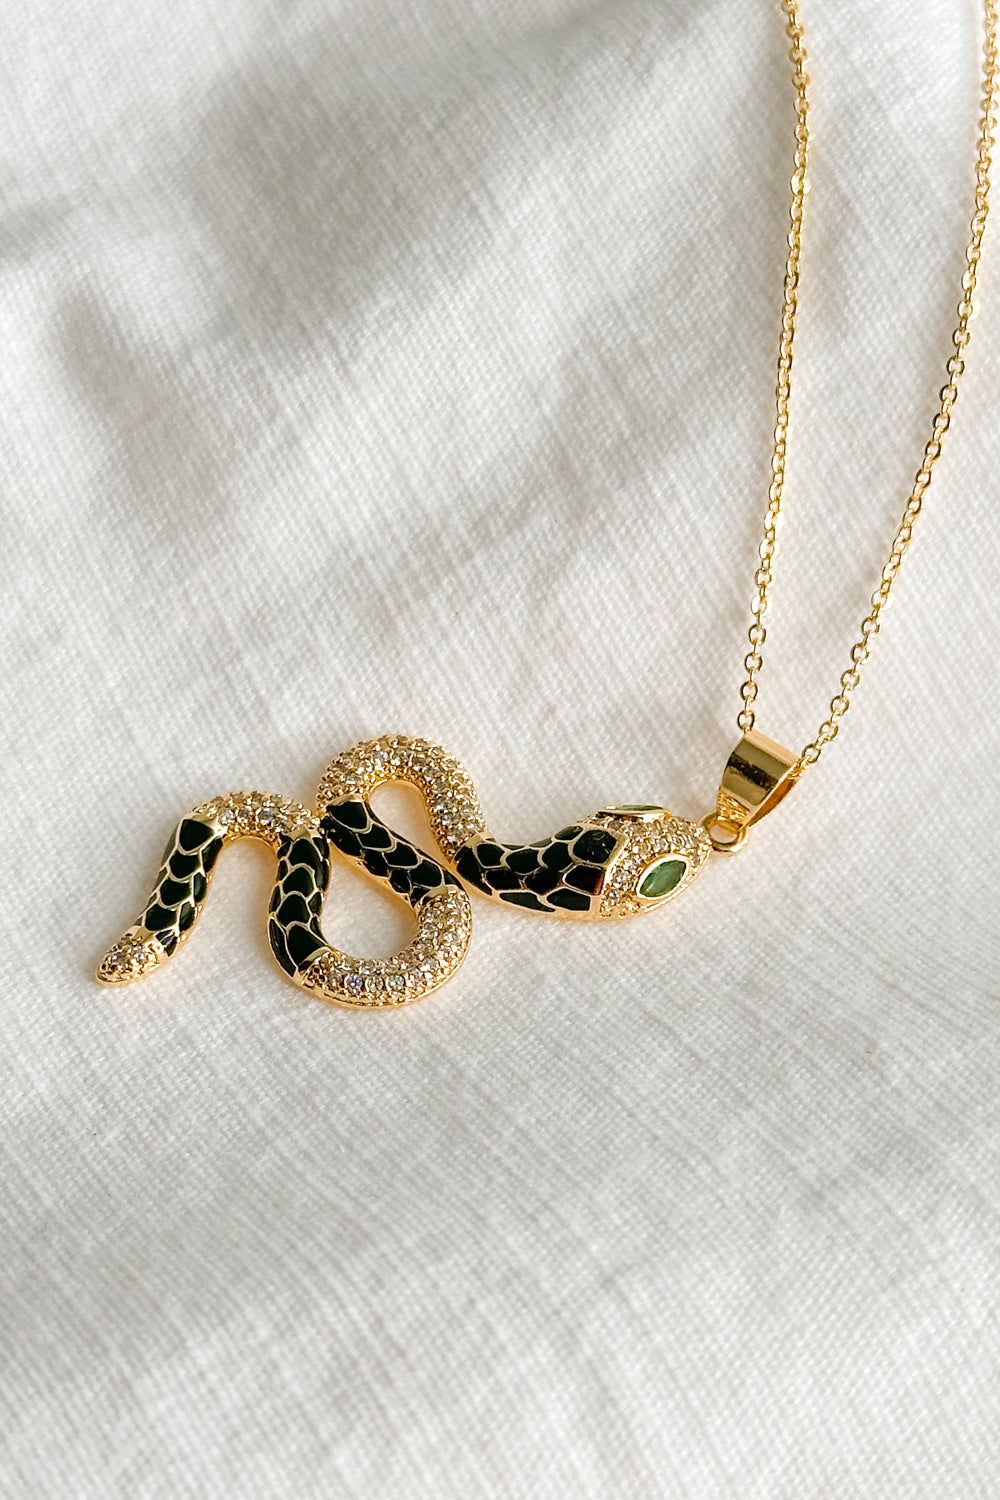 Flat lay view of the Lucia Black & Gold Snake Necklace which features gold chain link single layer with a black and gold snake medallion